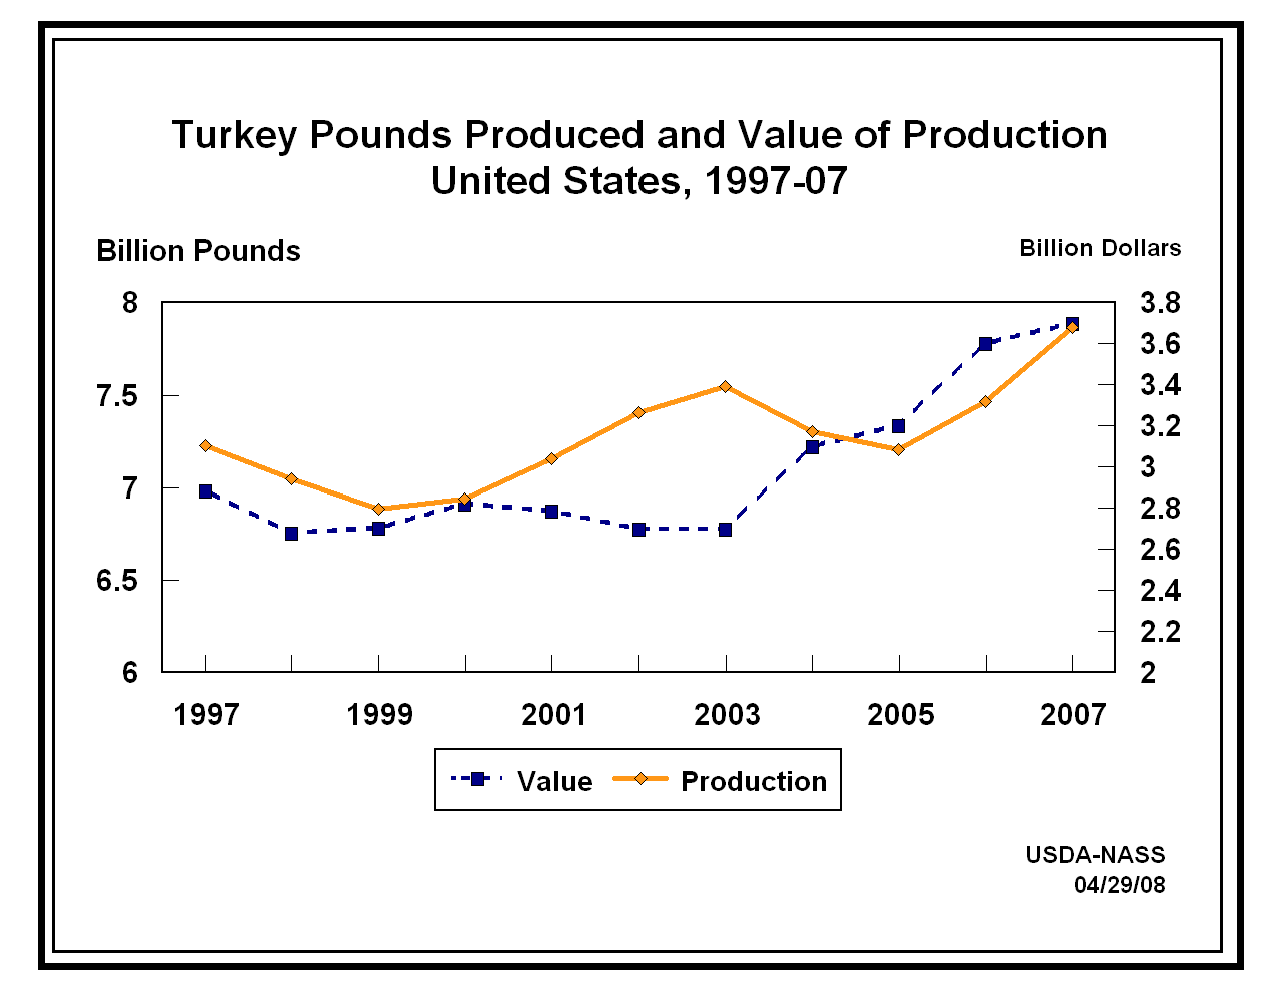 Turkeys: Production and Value of Production by Year, US